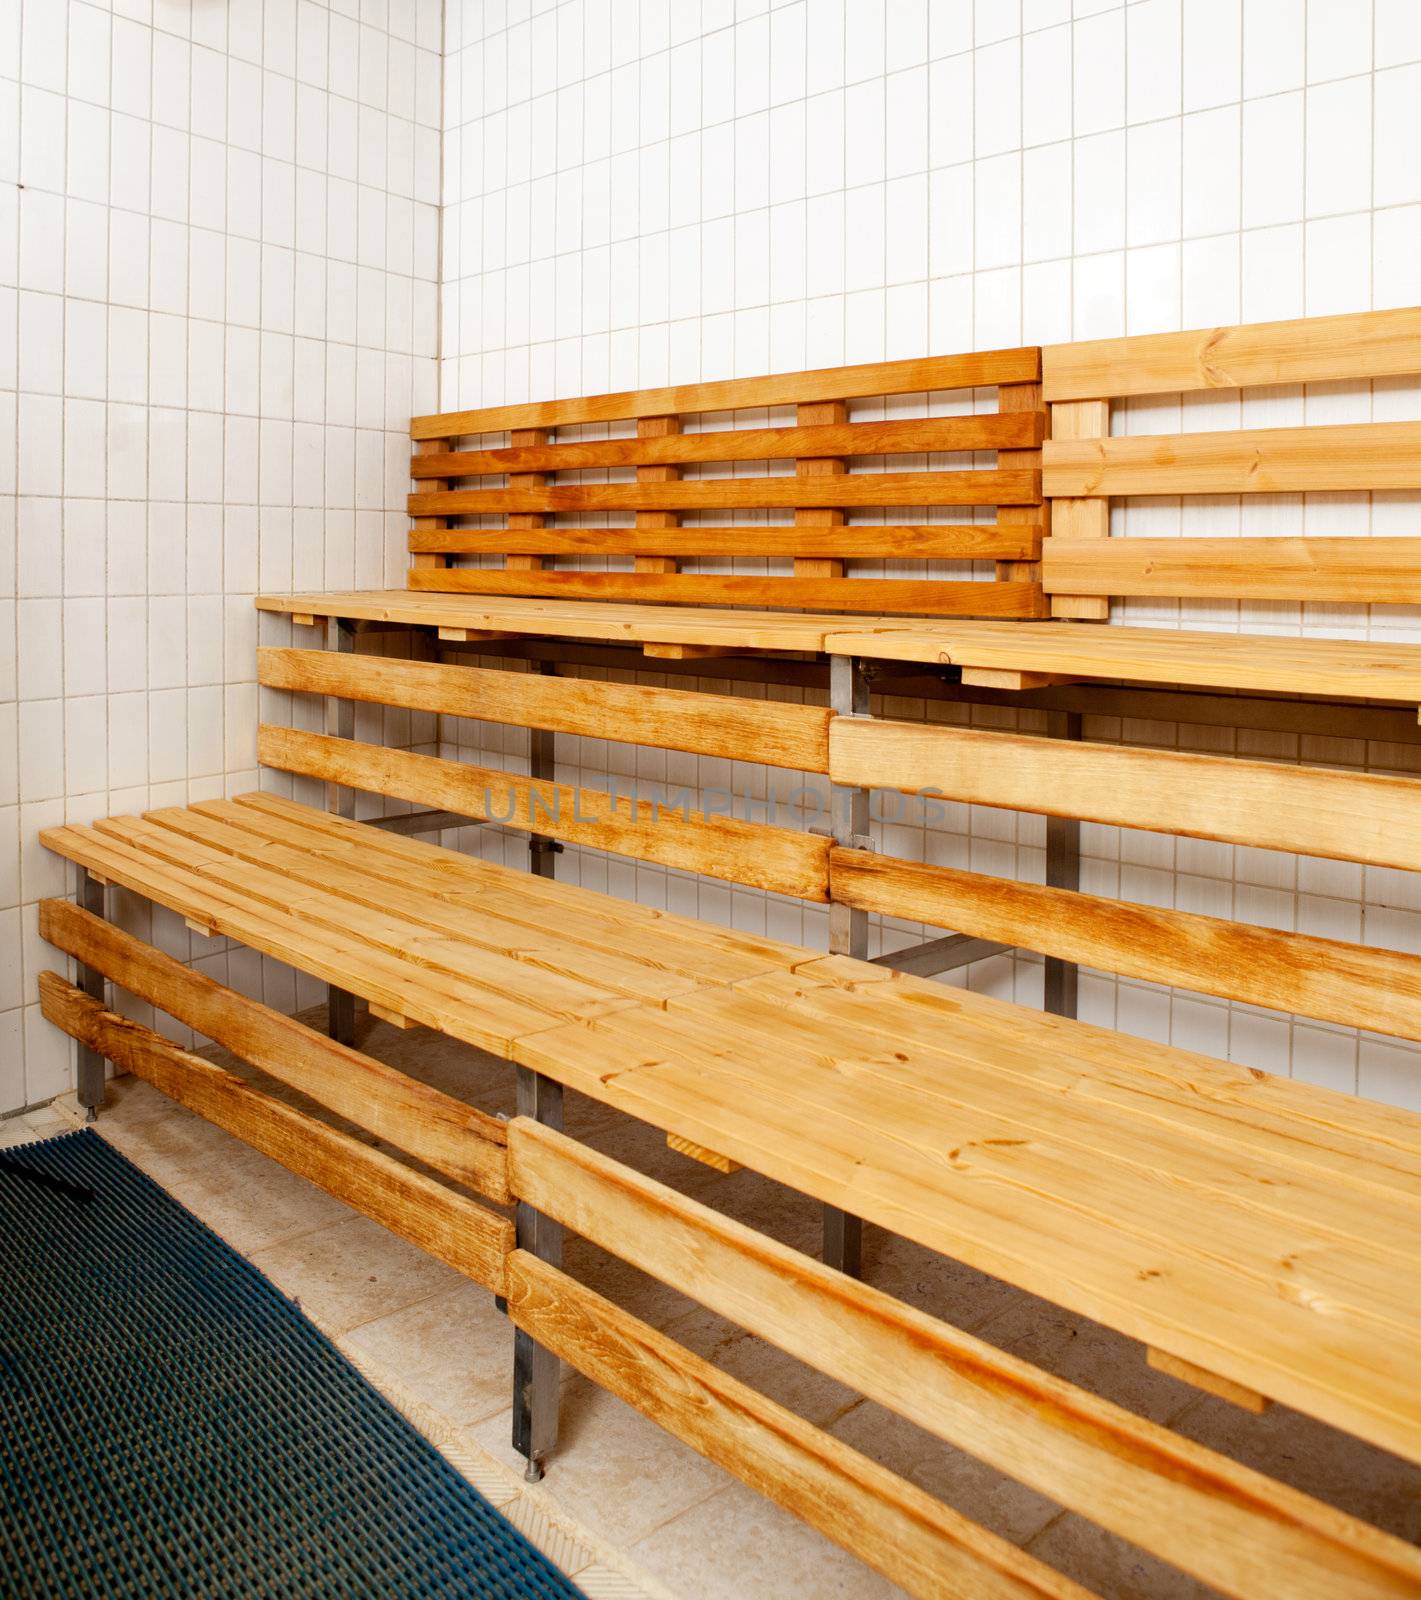 Detail of a sauna interior with tile walls and wooden benches